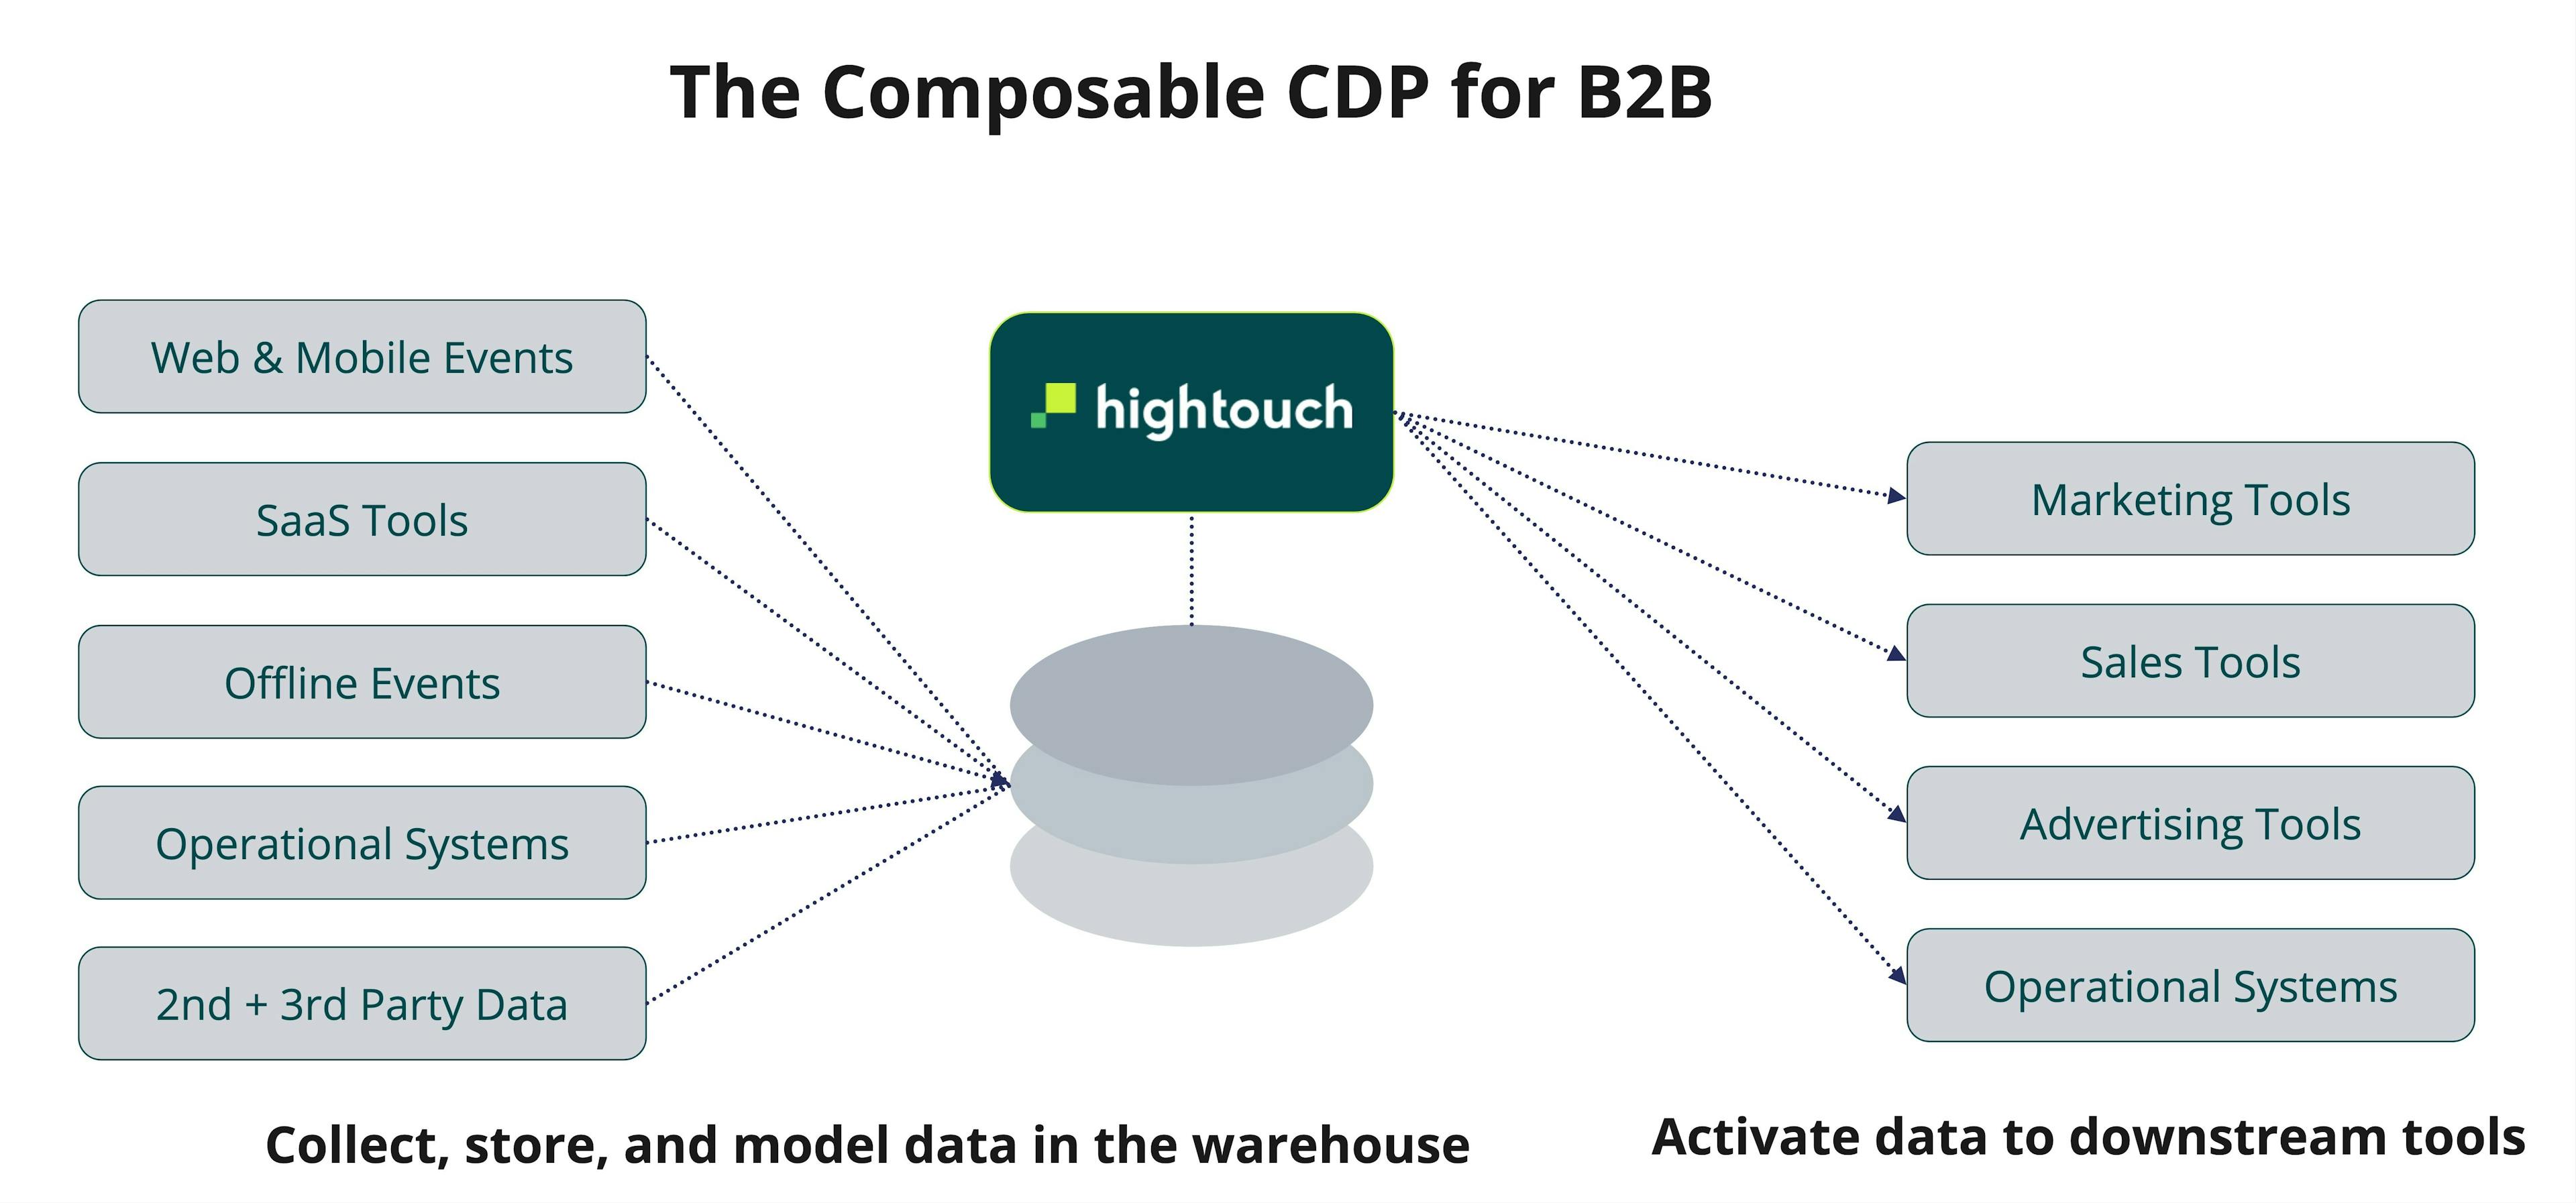 The Composable CDP for B2B